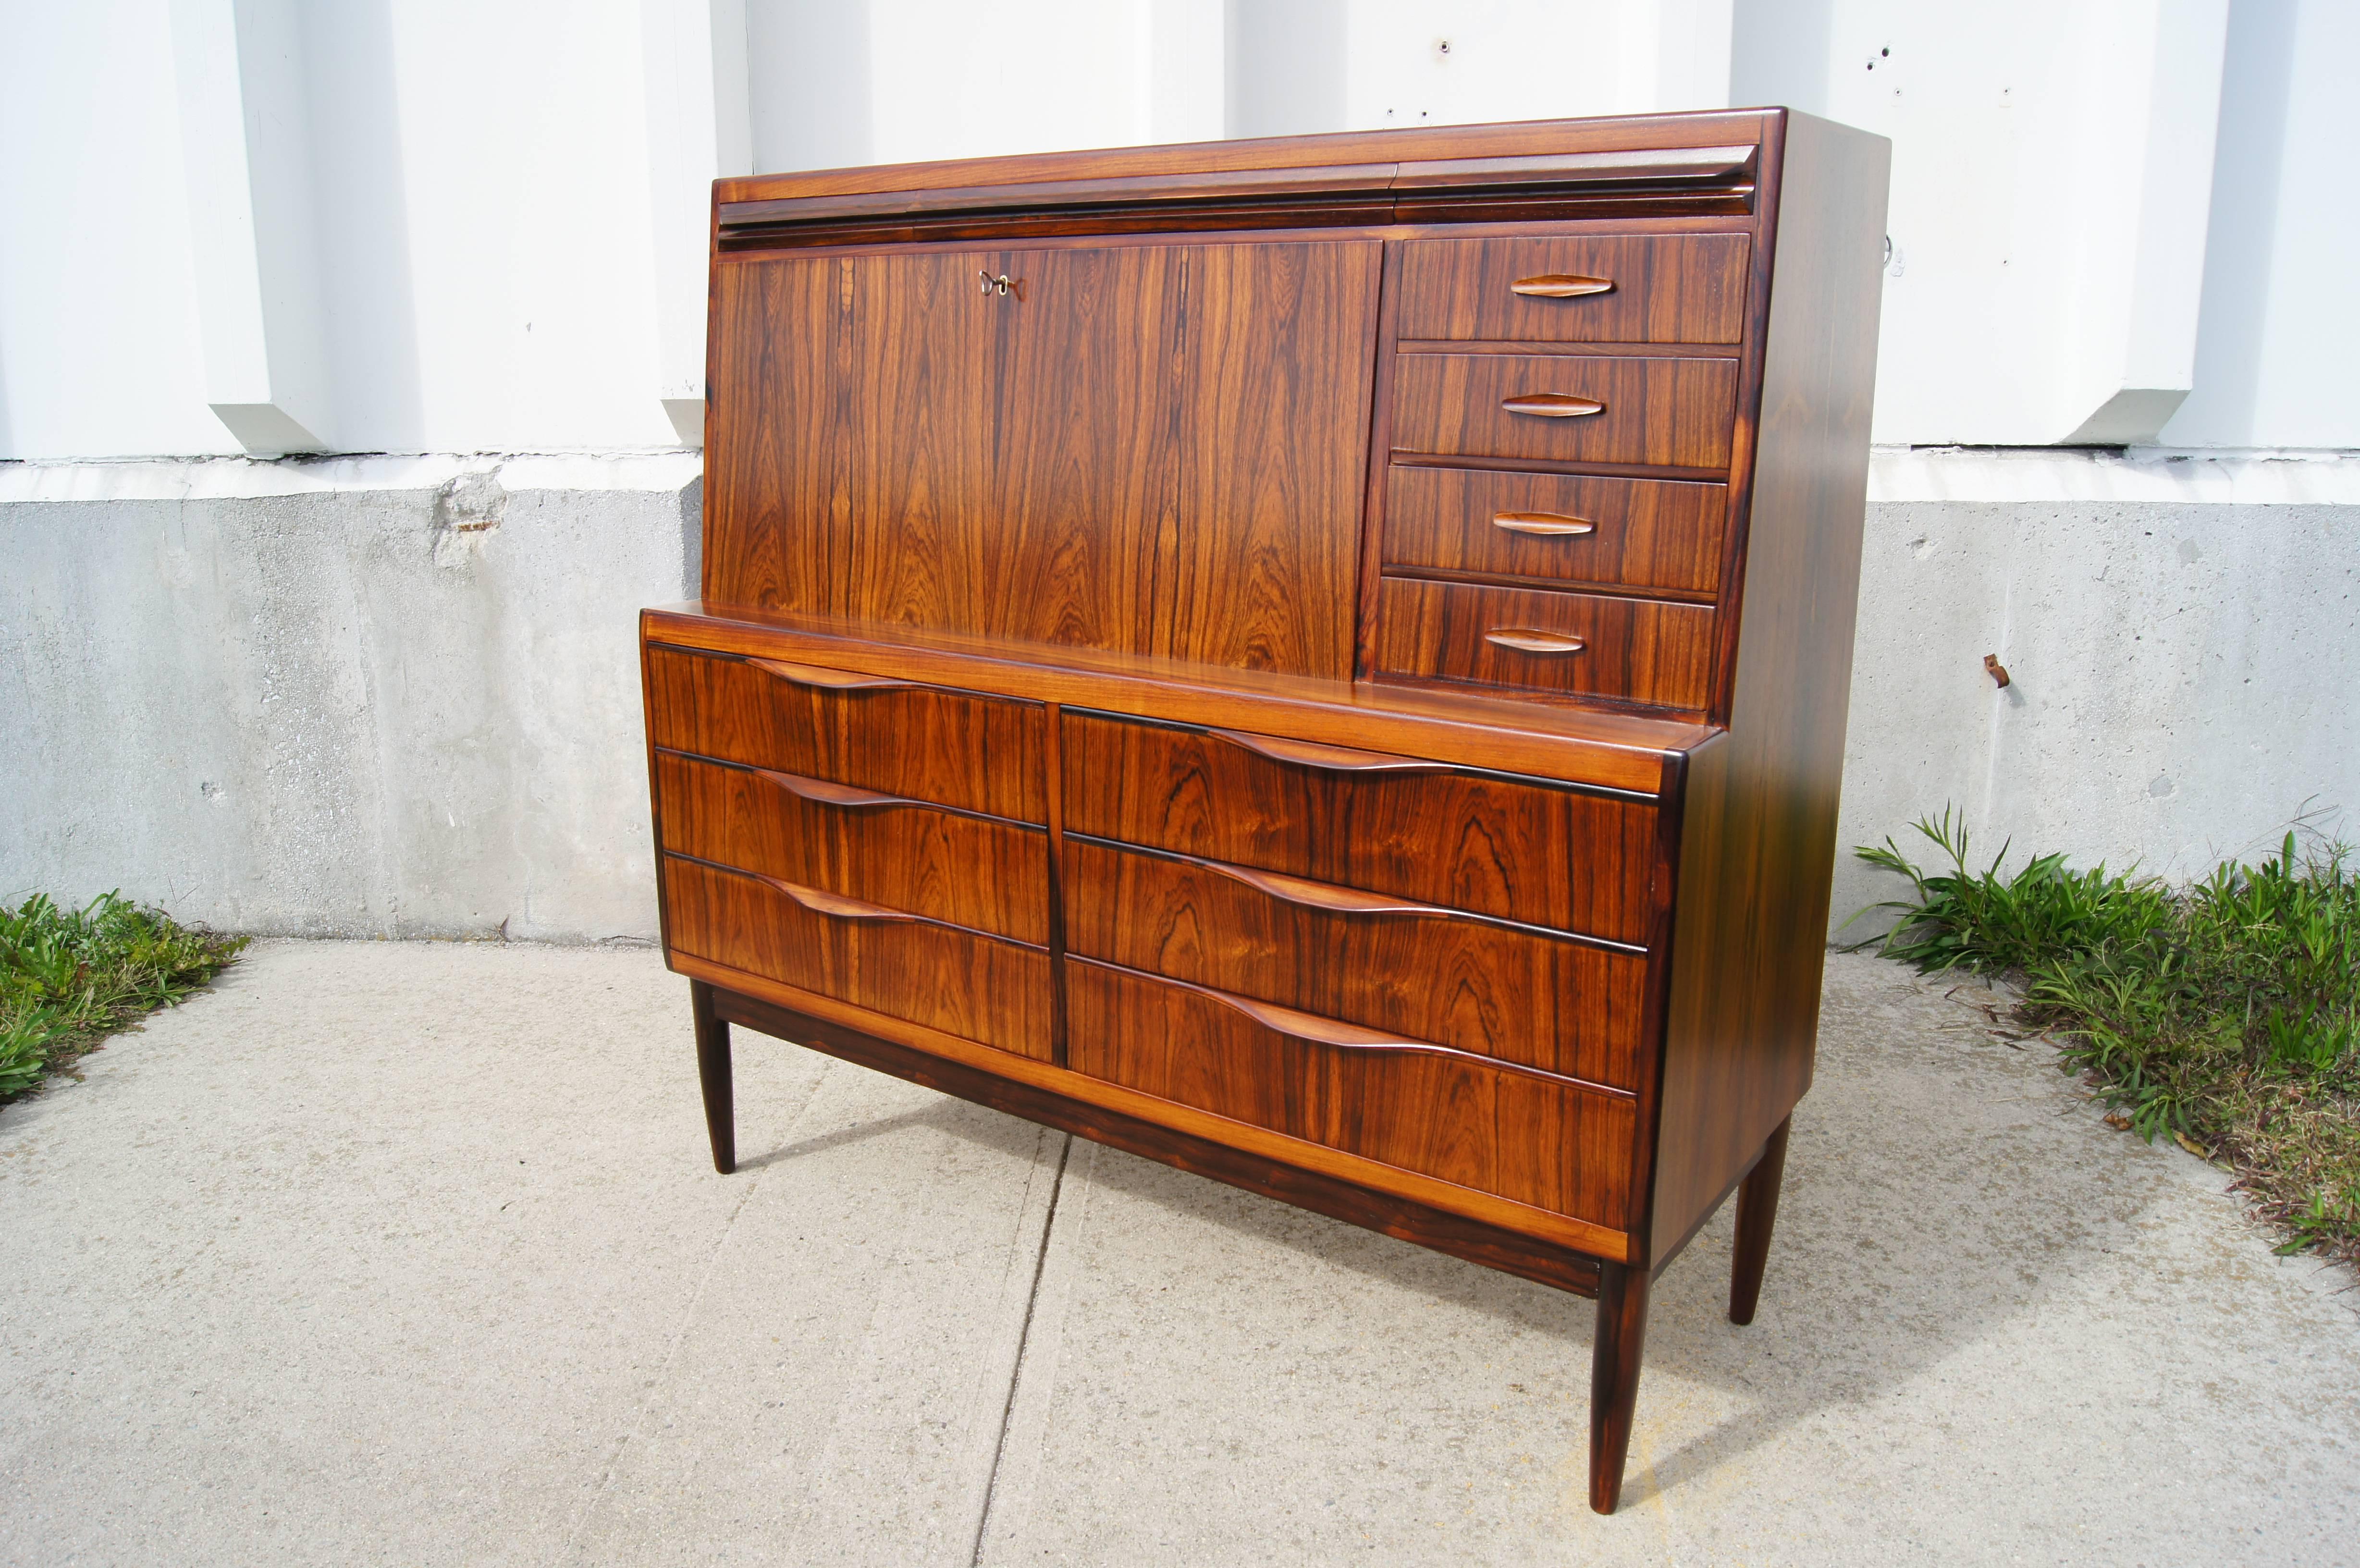 Designed by Erling Torvits for Klim Møbelfabrik, this exquisite secretaire takes full advantage of its richly grained Brazilian rosewood. The case sits on slender tapered feet, with six large drawers at the bottom. A locking desktop folds down to